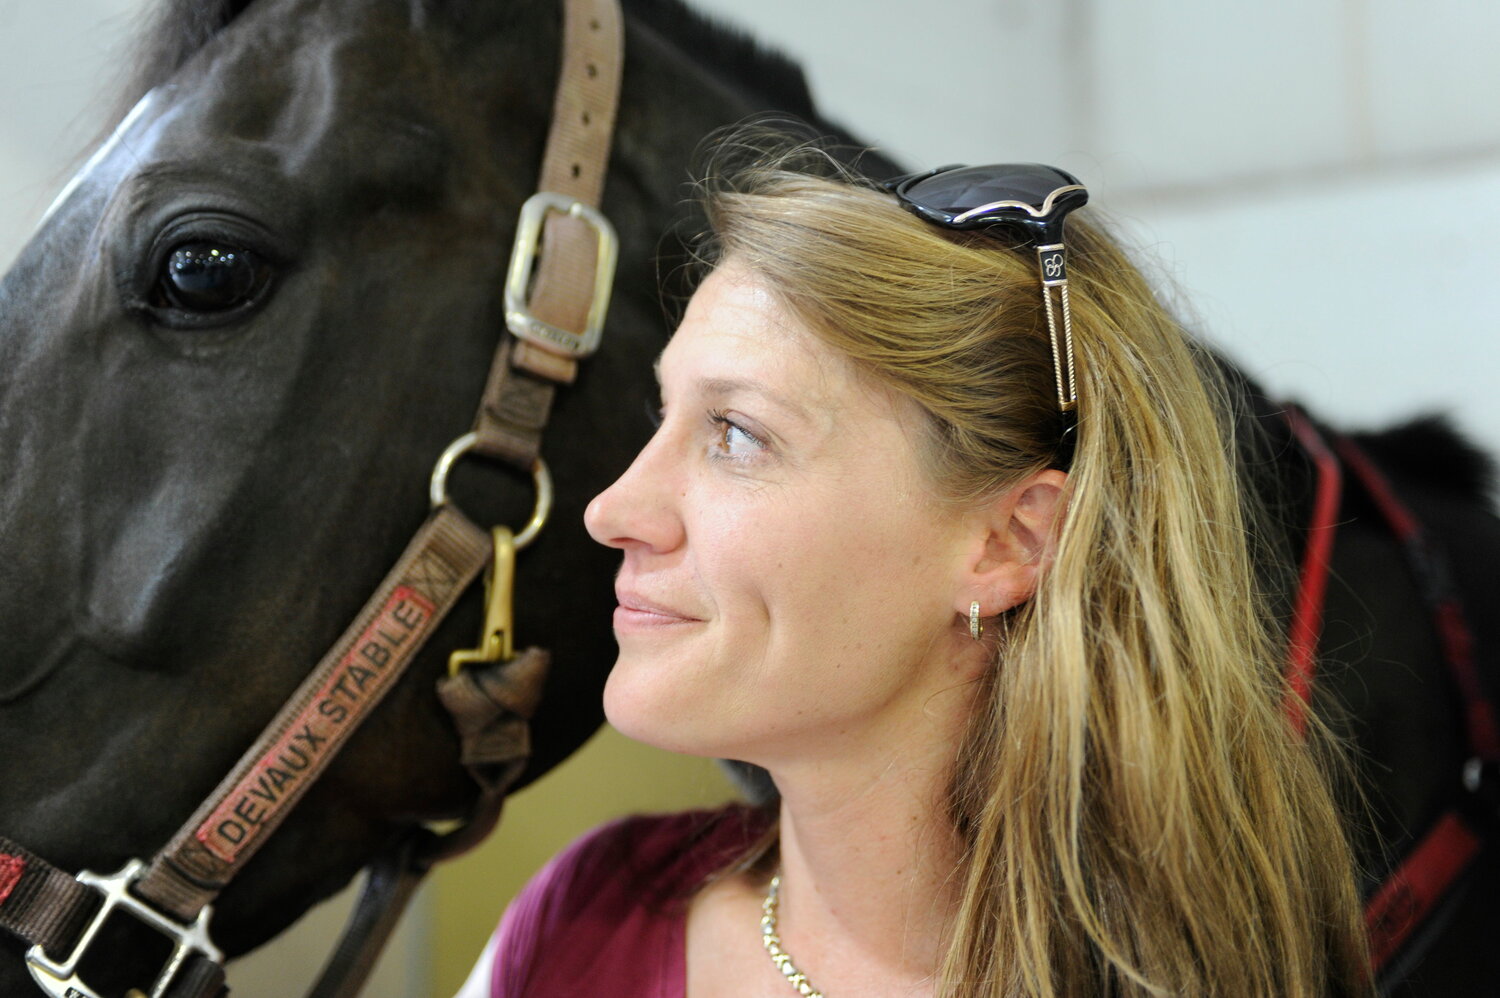 Nicole Regina hails from a long line of harness-racing relatives. Her folks, Dawn and Kenny DeVaux, are well known in the business, and she is the niece of noted driver Jimmy DeVaux.